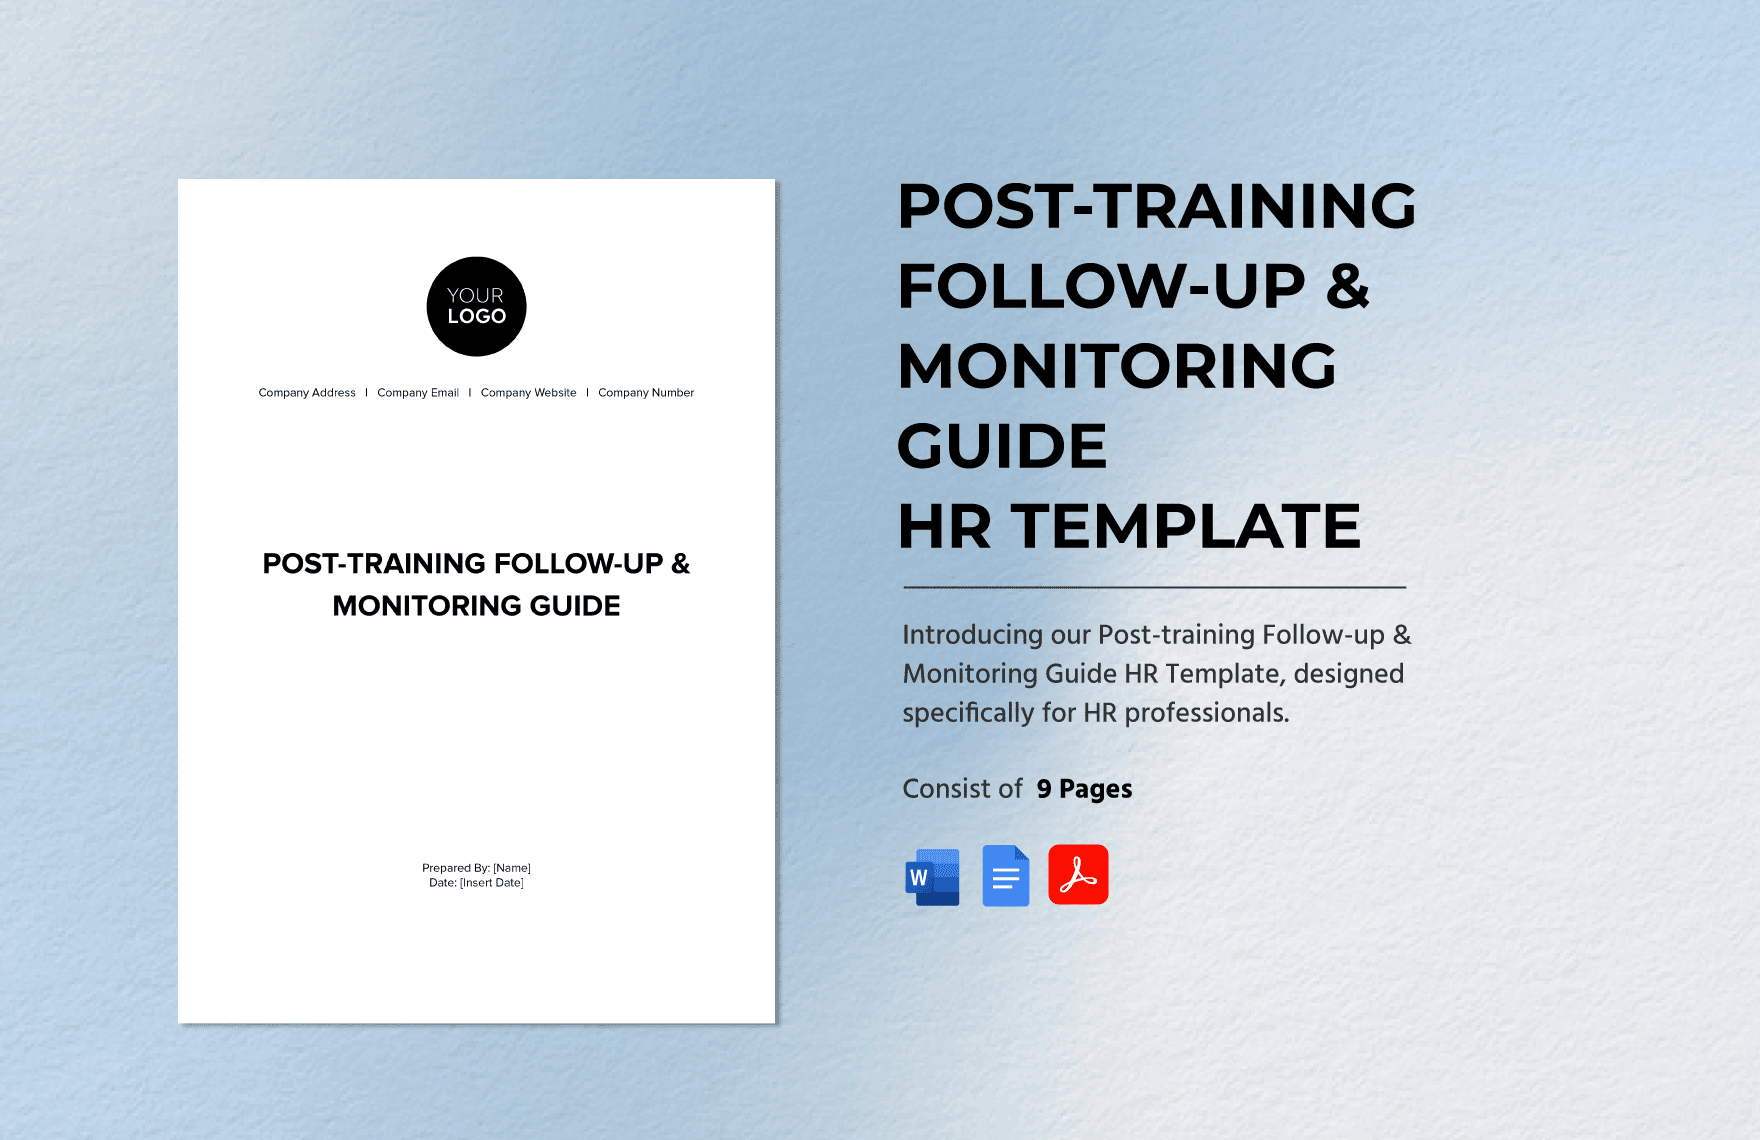 Post-training Follow-up & Monitoring Guide HR Template